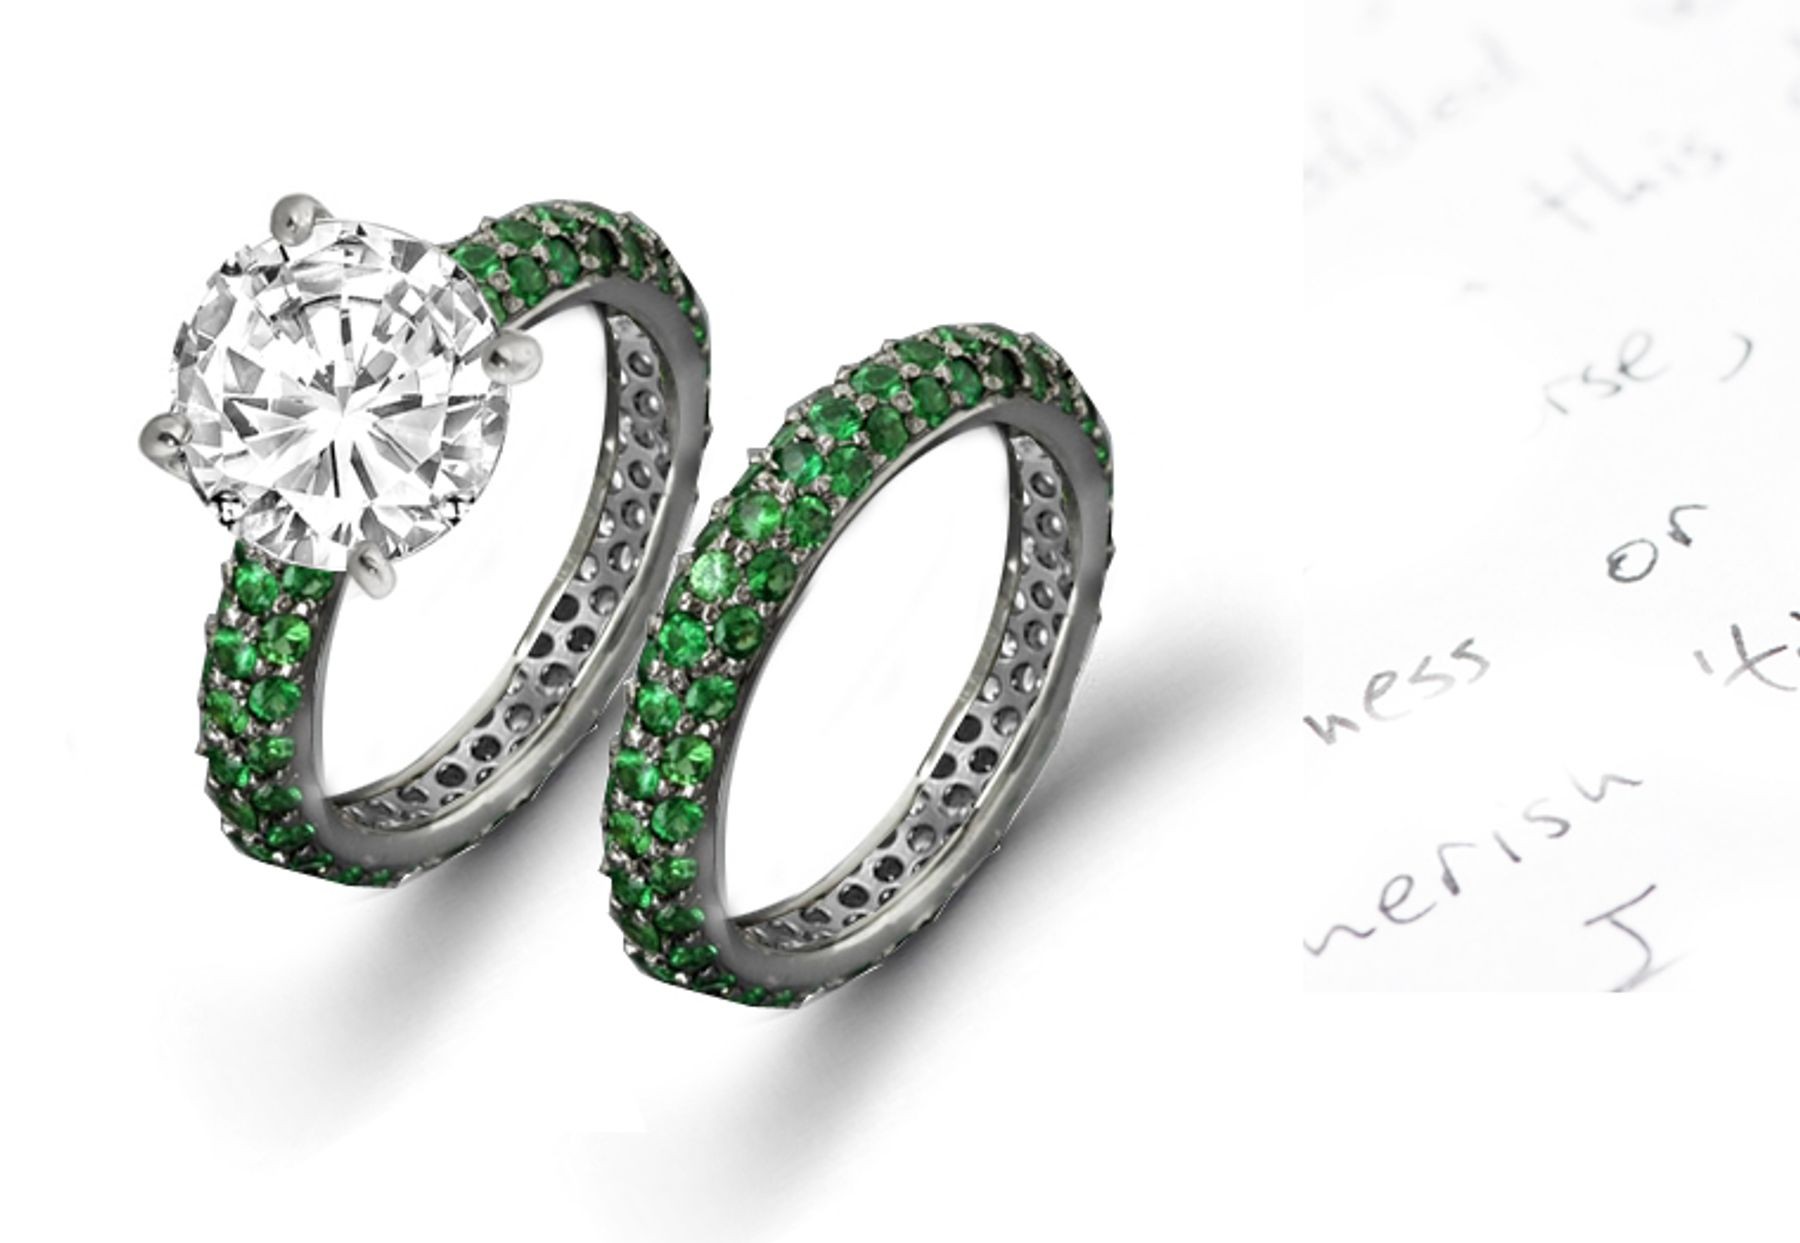 Divine Offerings: Round Shaped Diamond atop French Micropave Natual Emerald & Diamond Sprinkle Ring & Eternity Band